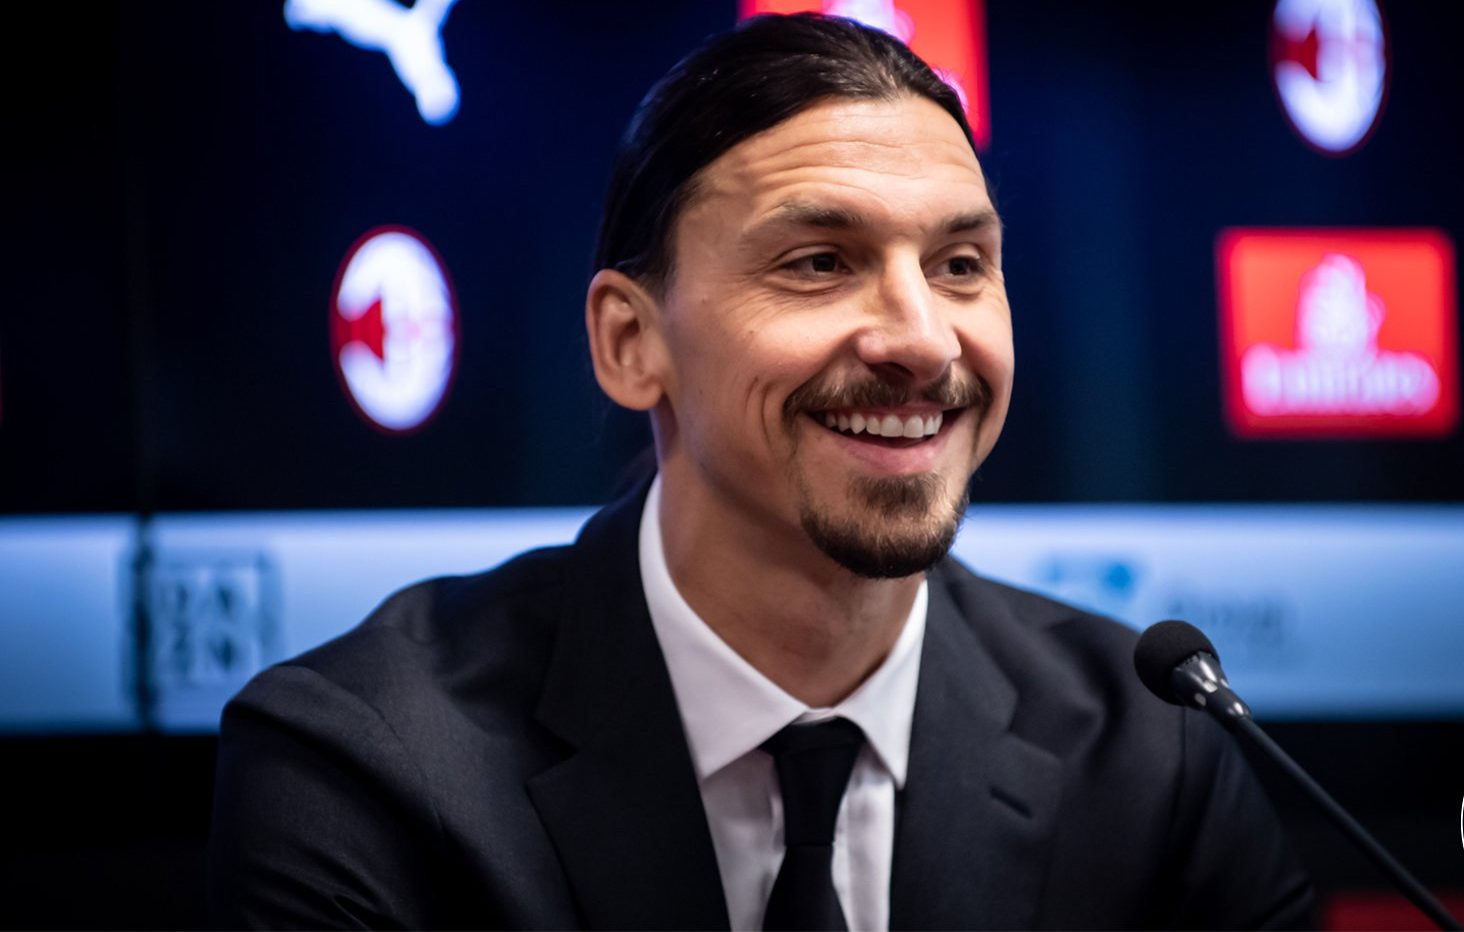 Soccer legend Zlatan Ibrahimovic considers life after sports